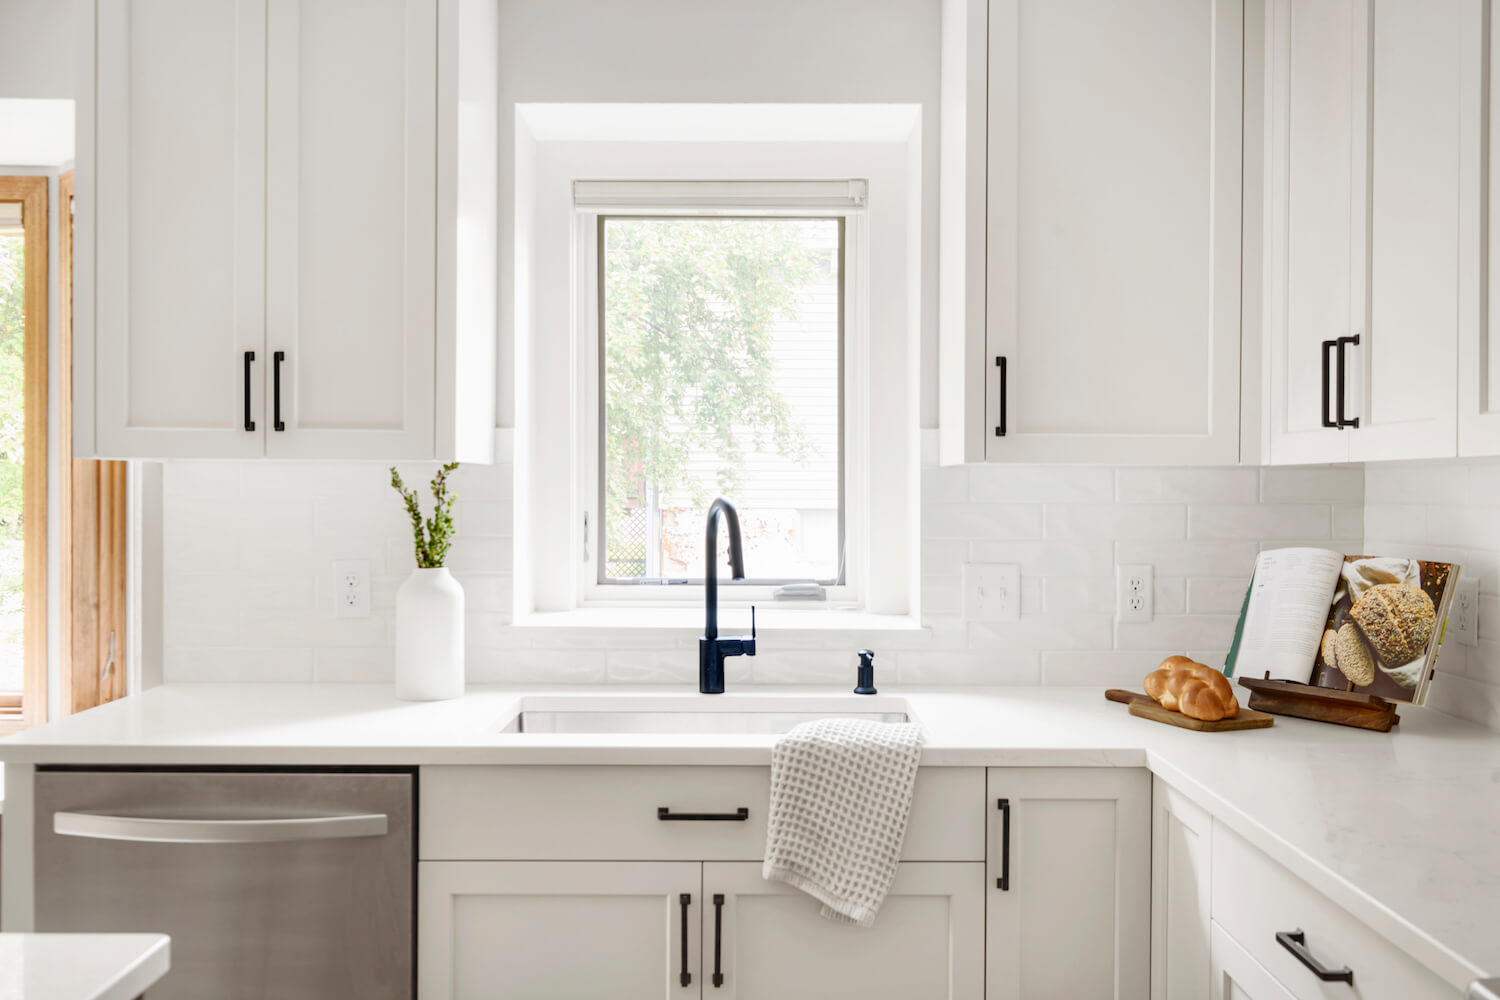 A very tidy looking white kitchen sink on a white countertop